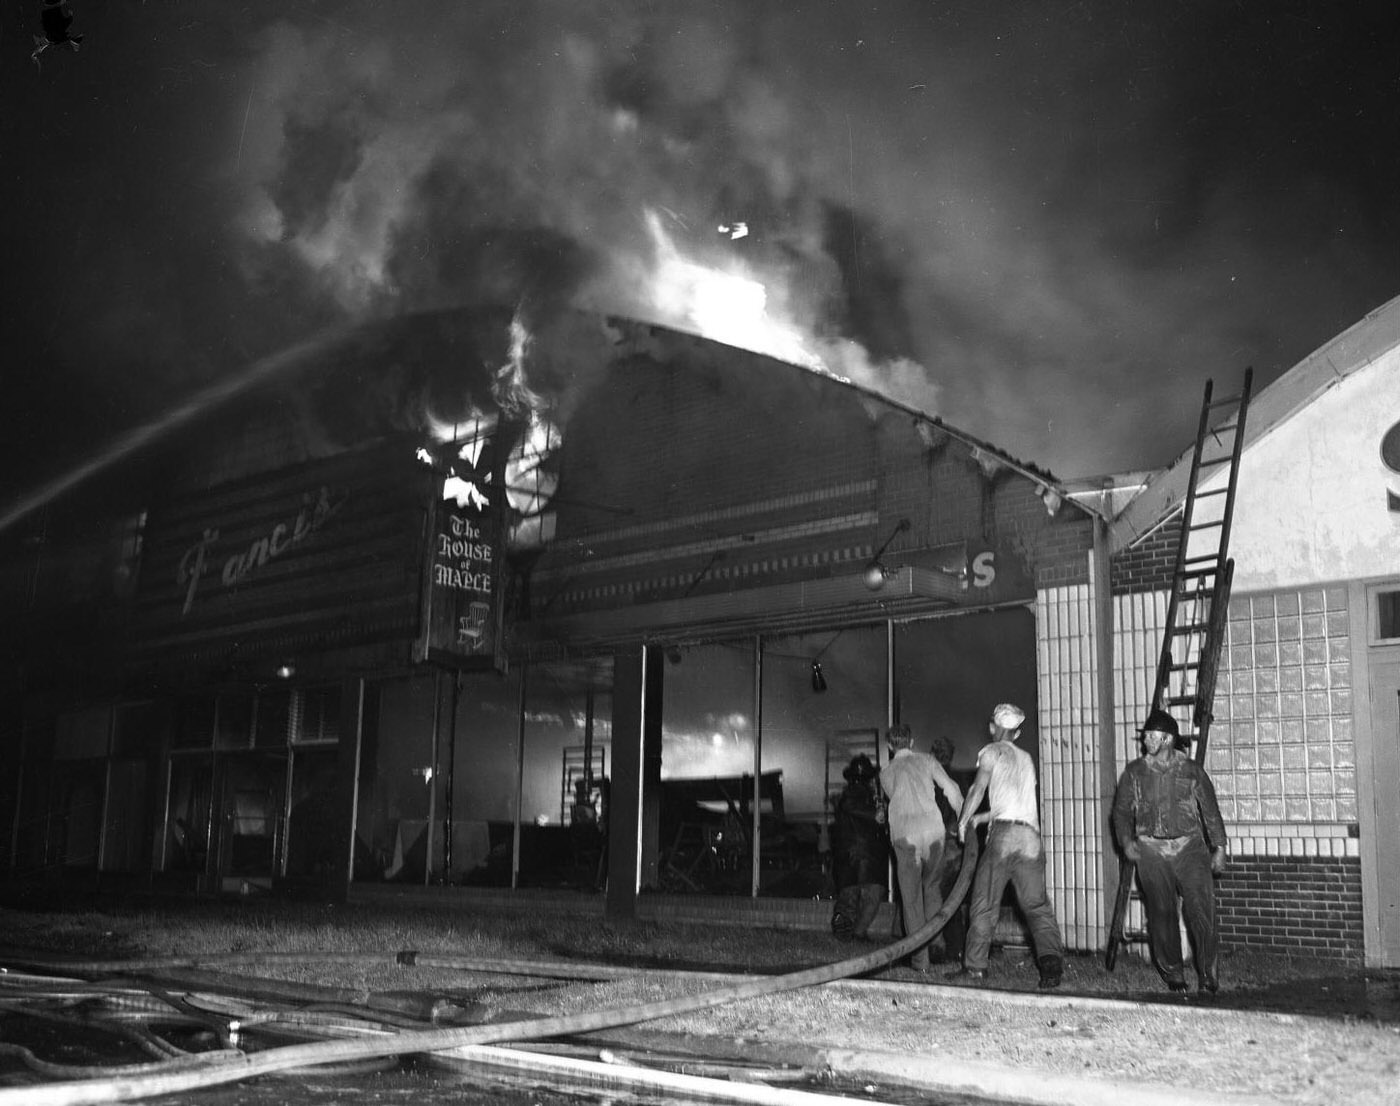 Francis Furniture Building Damaged by Fire, 1953.